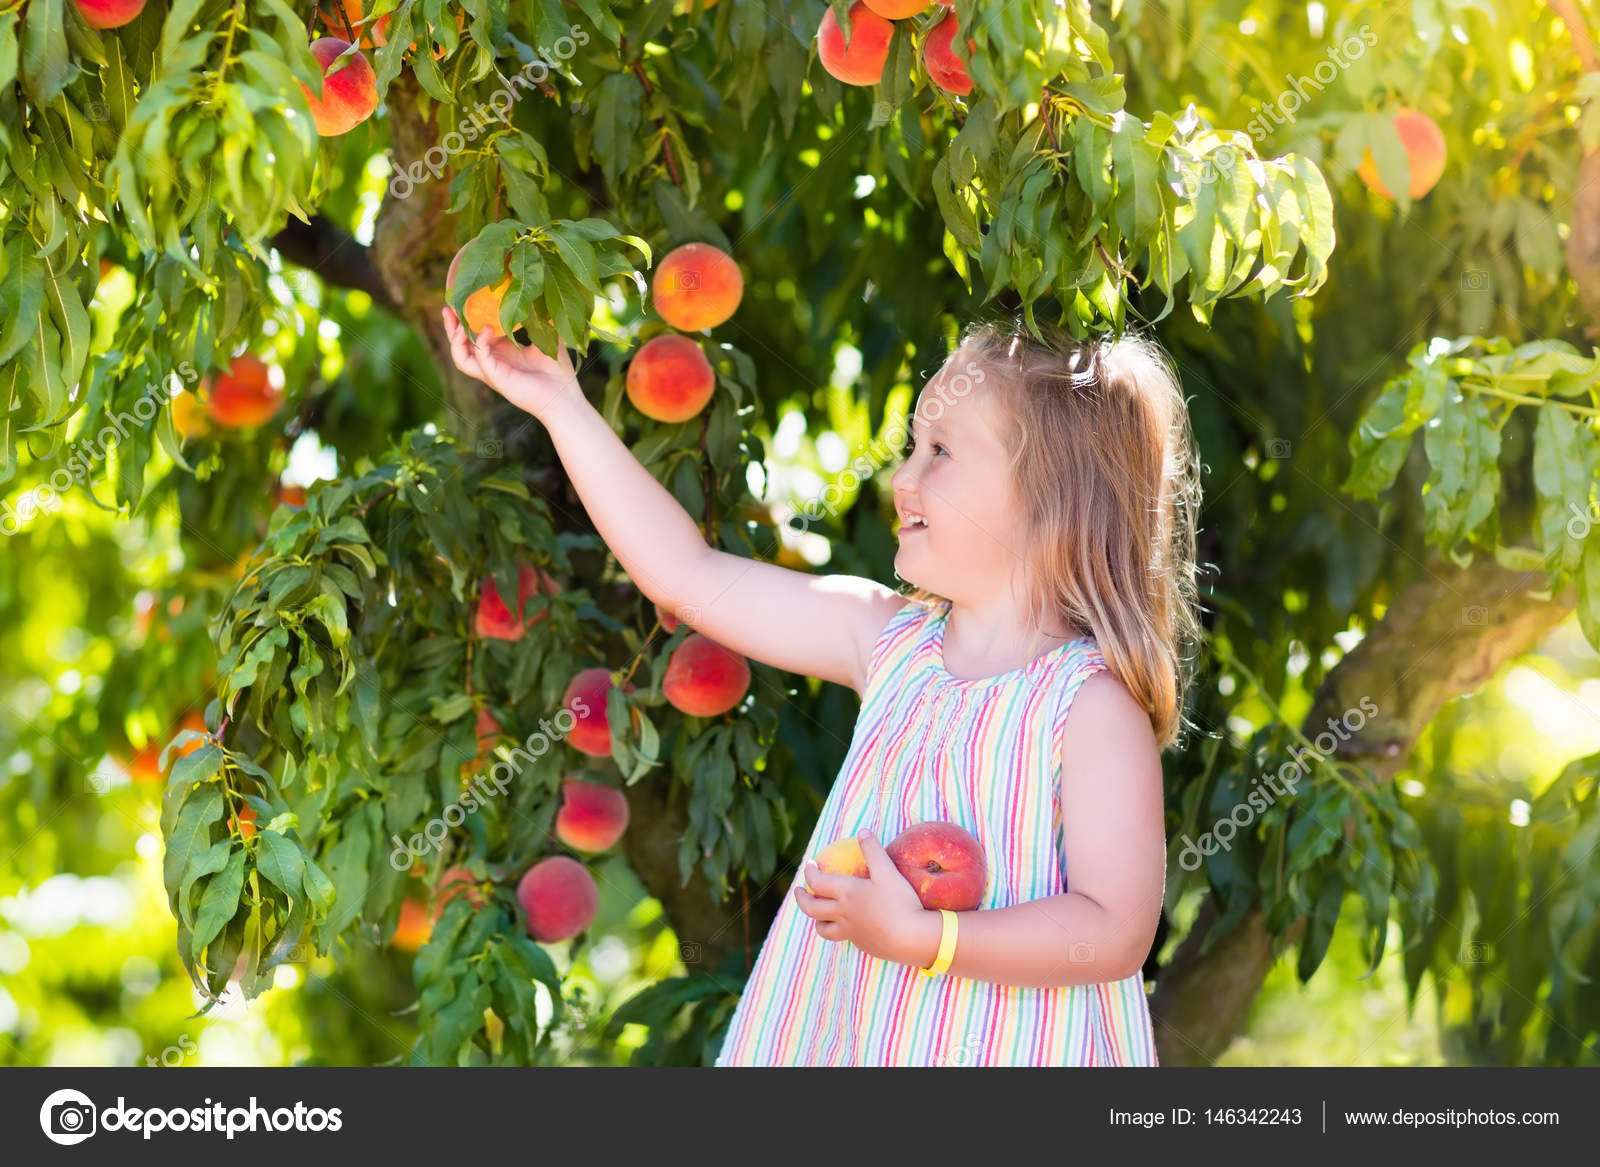 Child Picking And Eating Peach From Fruit Tree Stock Photo